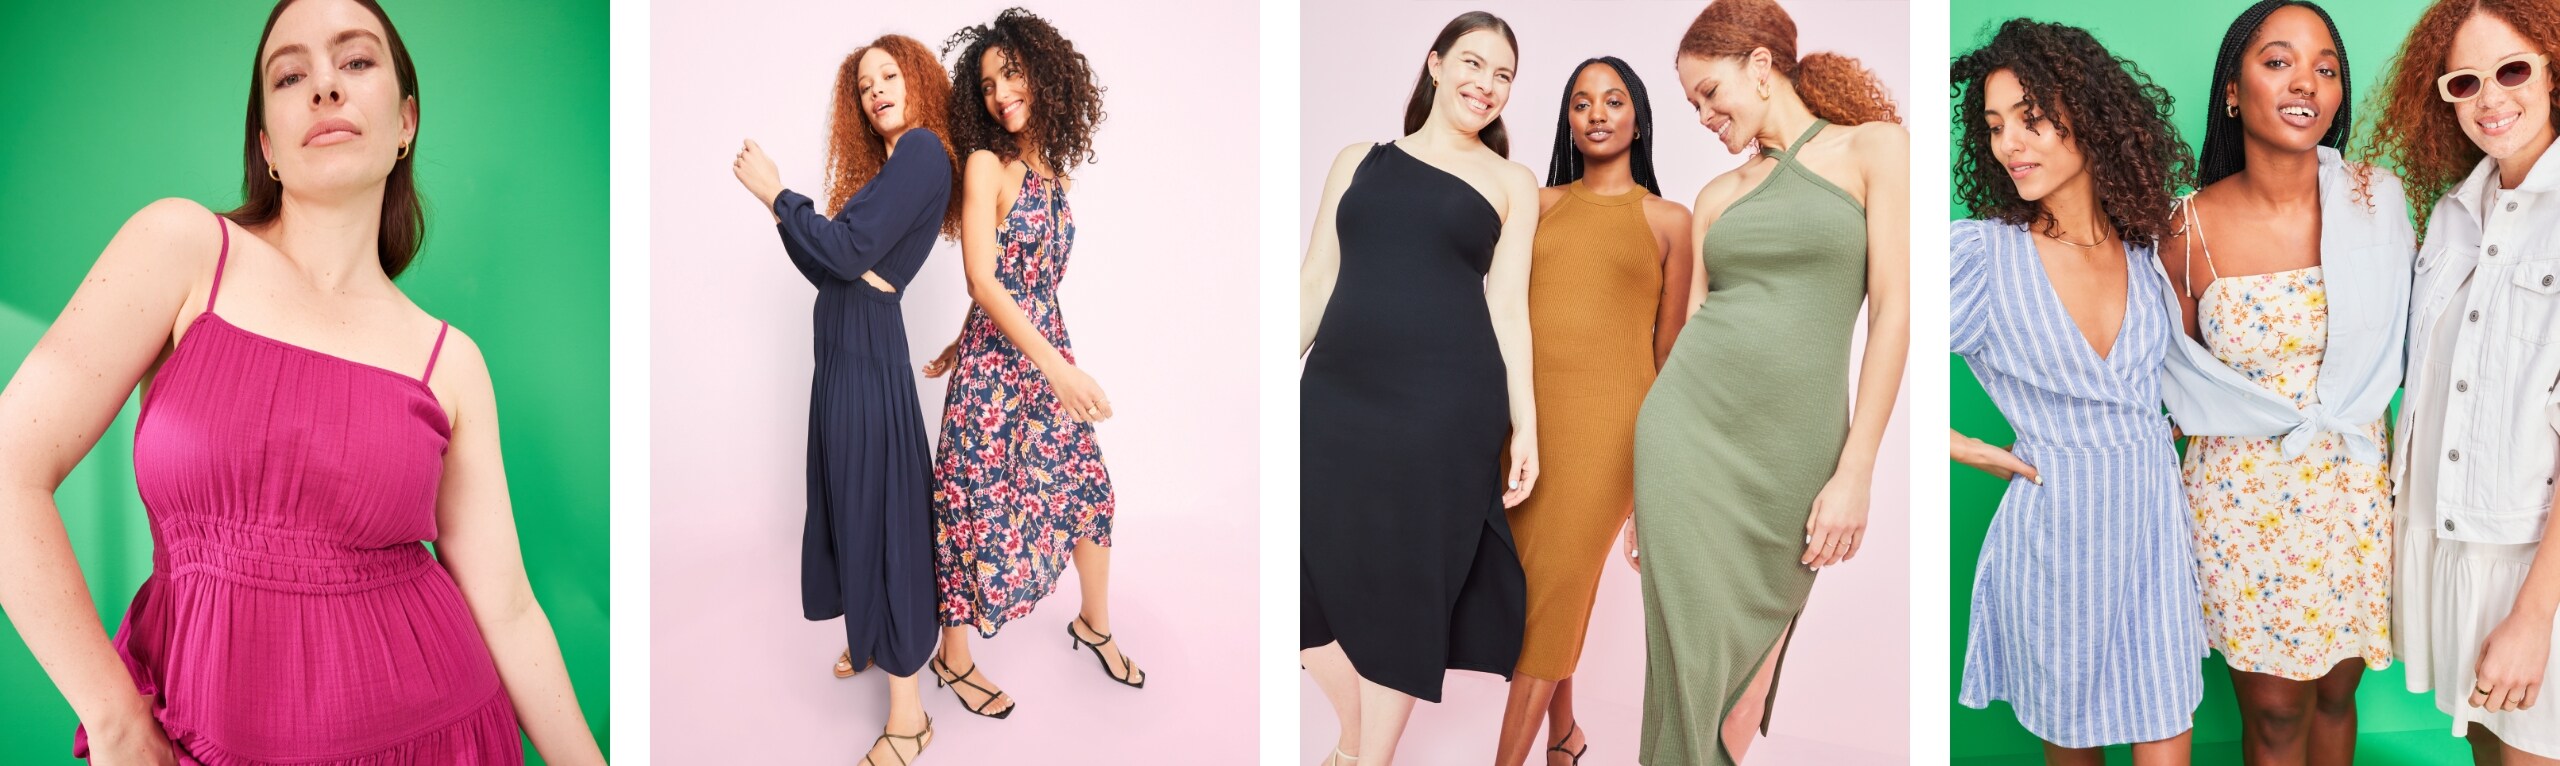 Group of female models wearing Old Navy dresses in a variety of colors, prints and silhouettes.